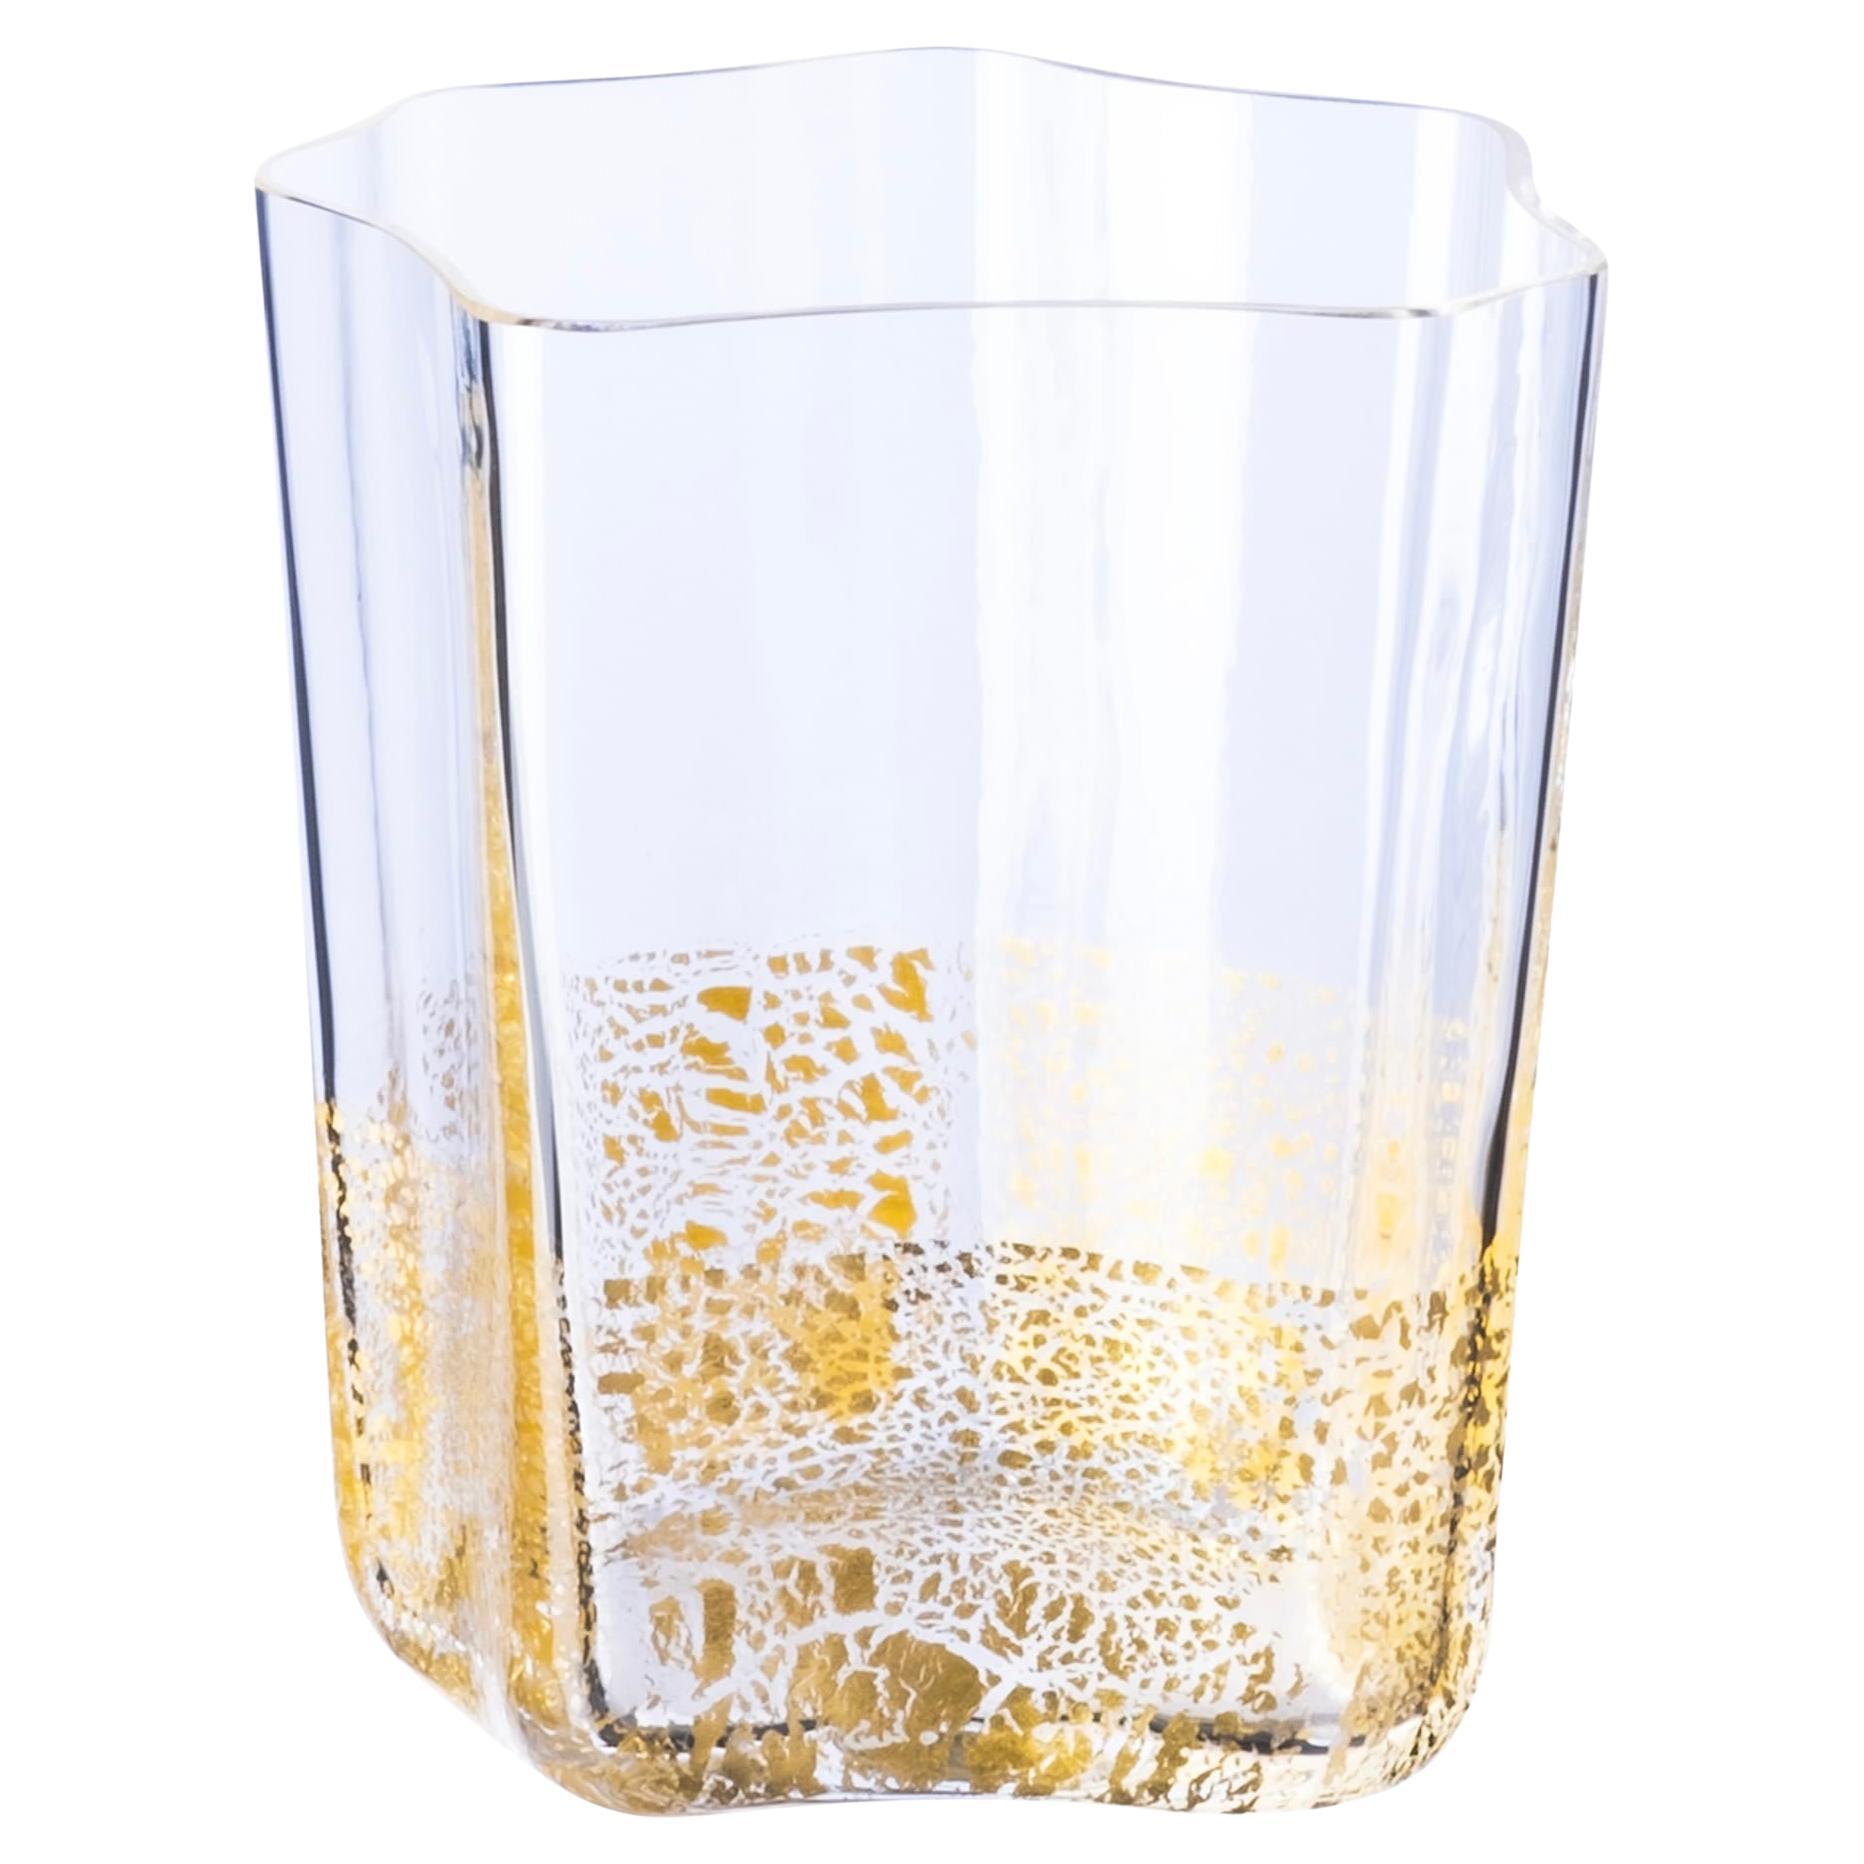 Epta Shaped Crystal Glass with Gold Leaf by Diego Chilò For Sale